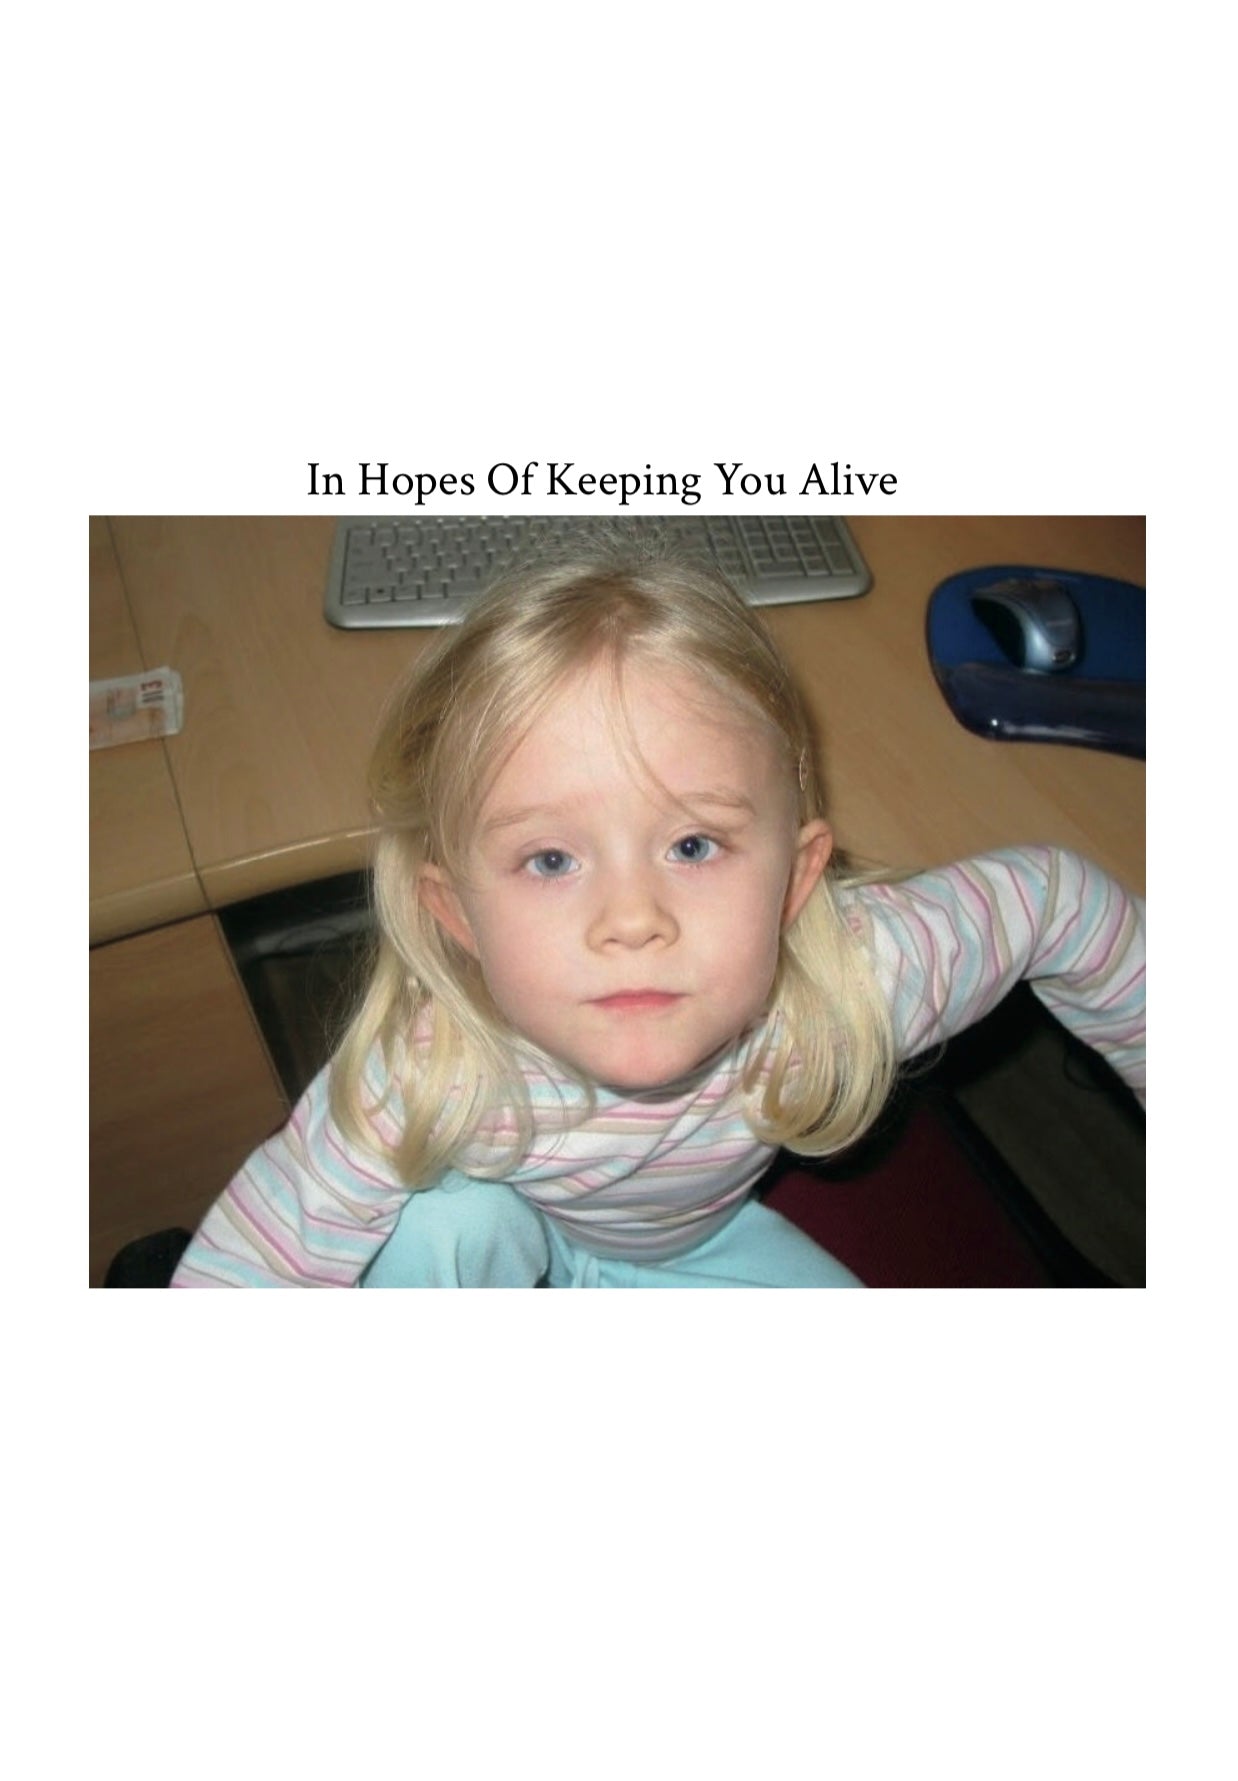 ‘In Hopes Of Keeping You Alive’ zine by Eloise Clarkson